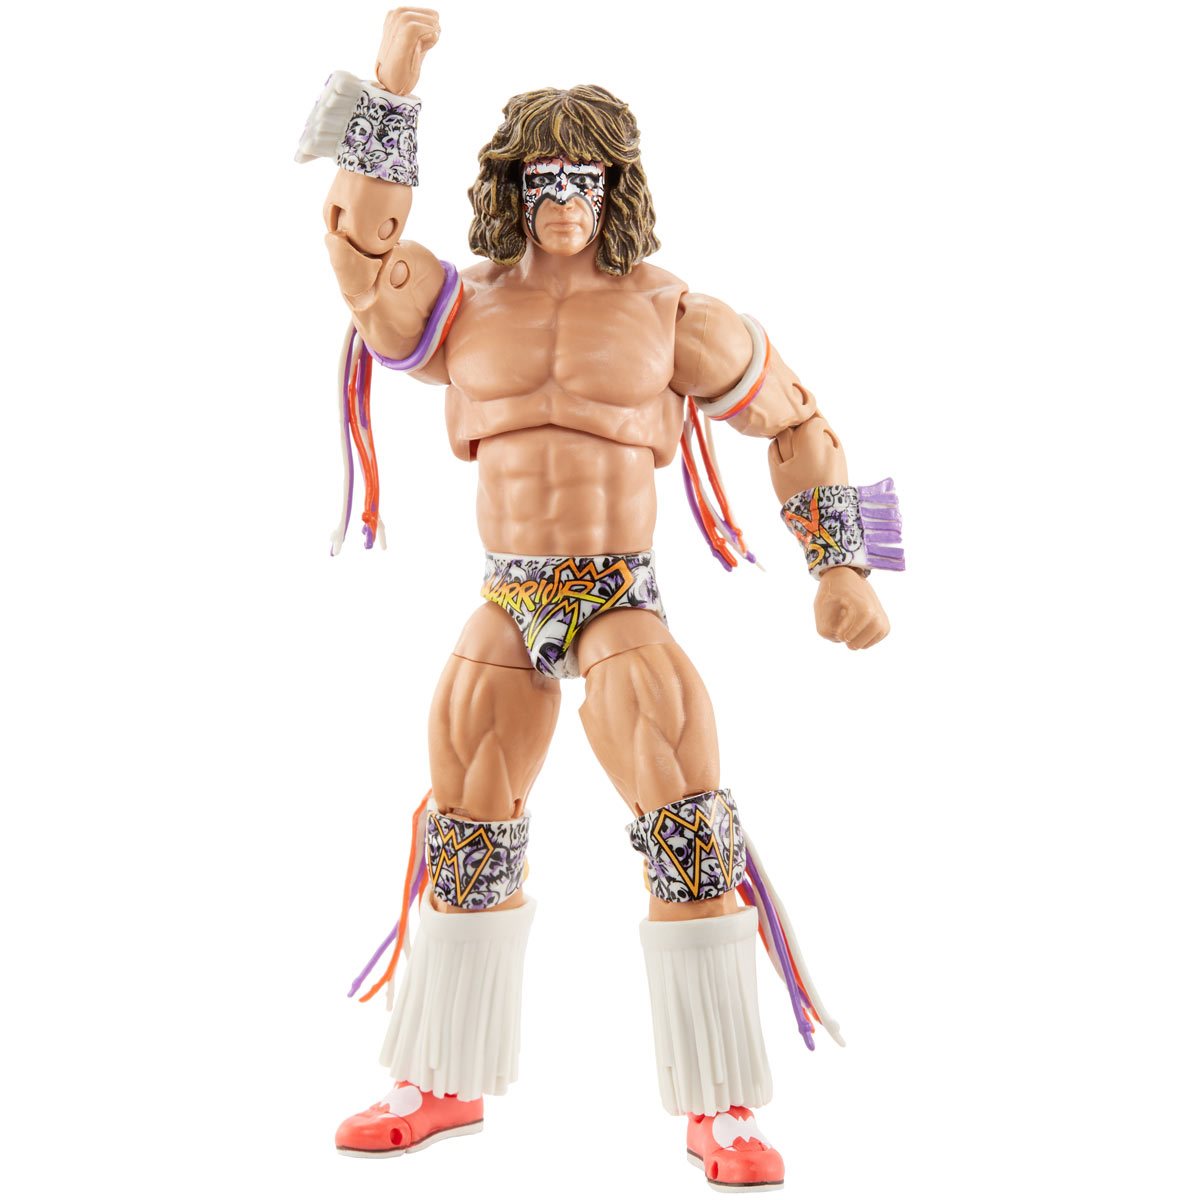 ultimate warrior without clothes - Heretoserveyou